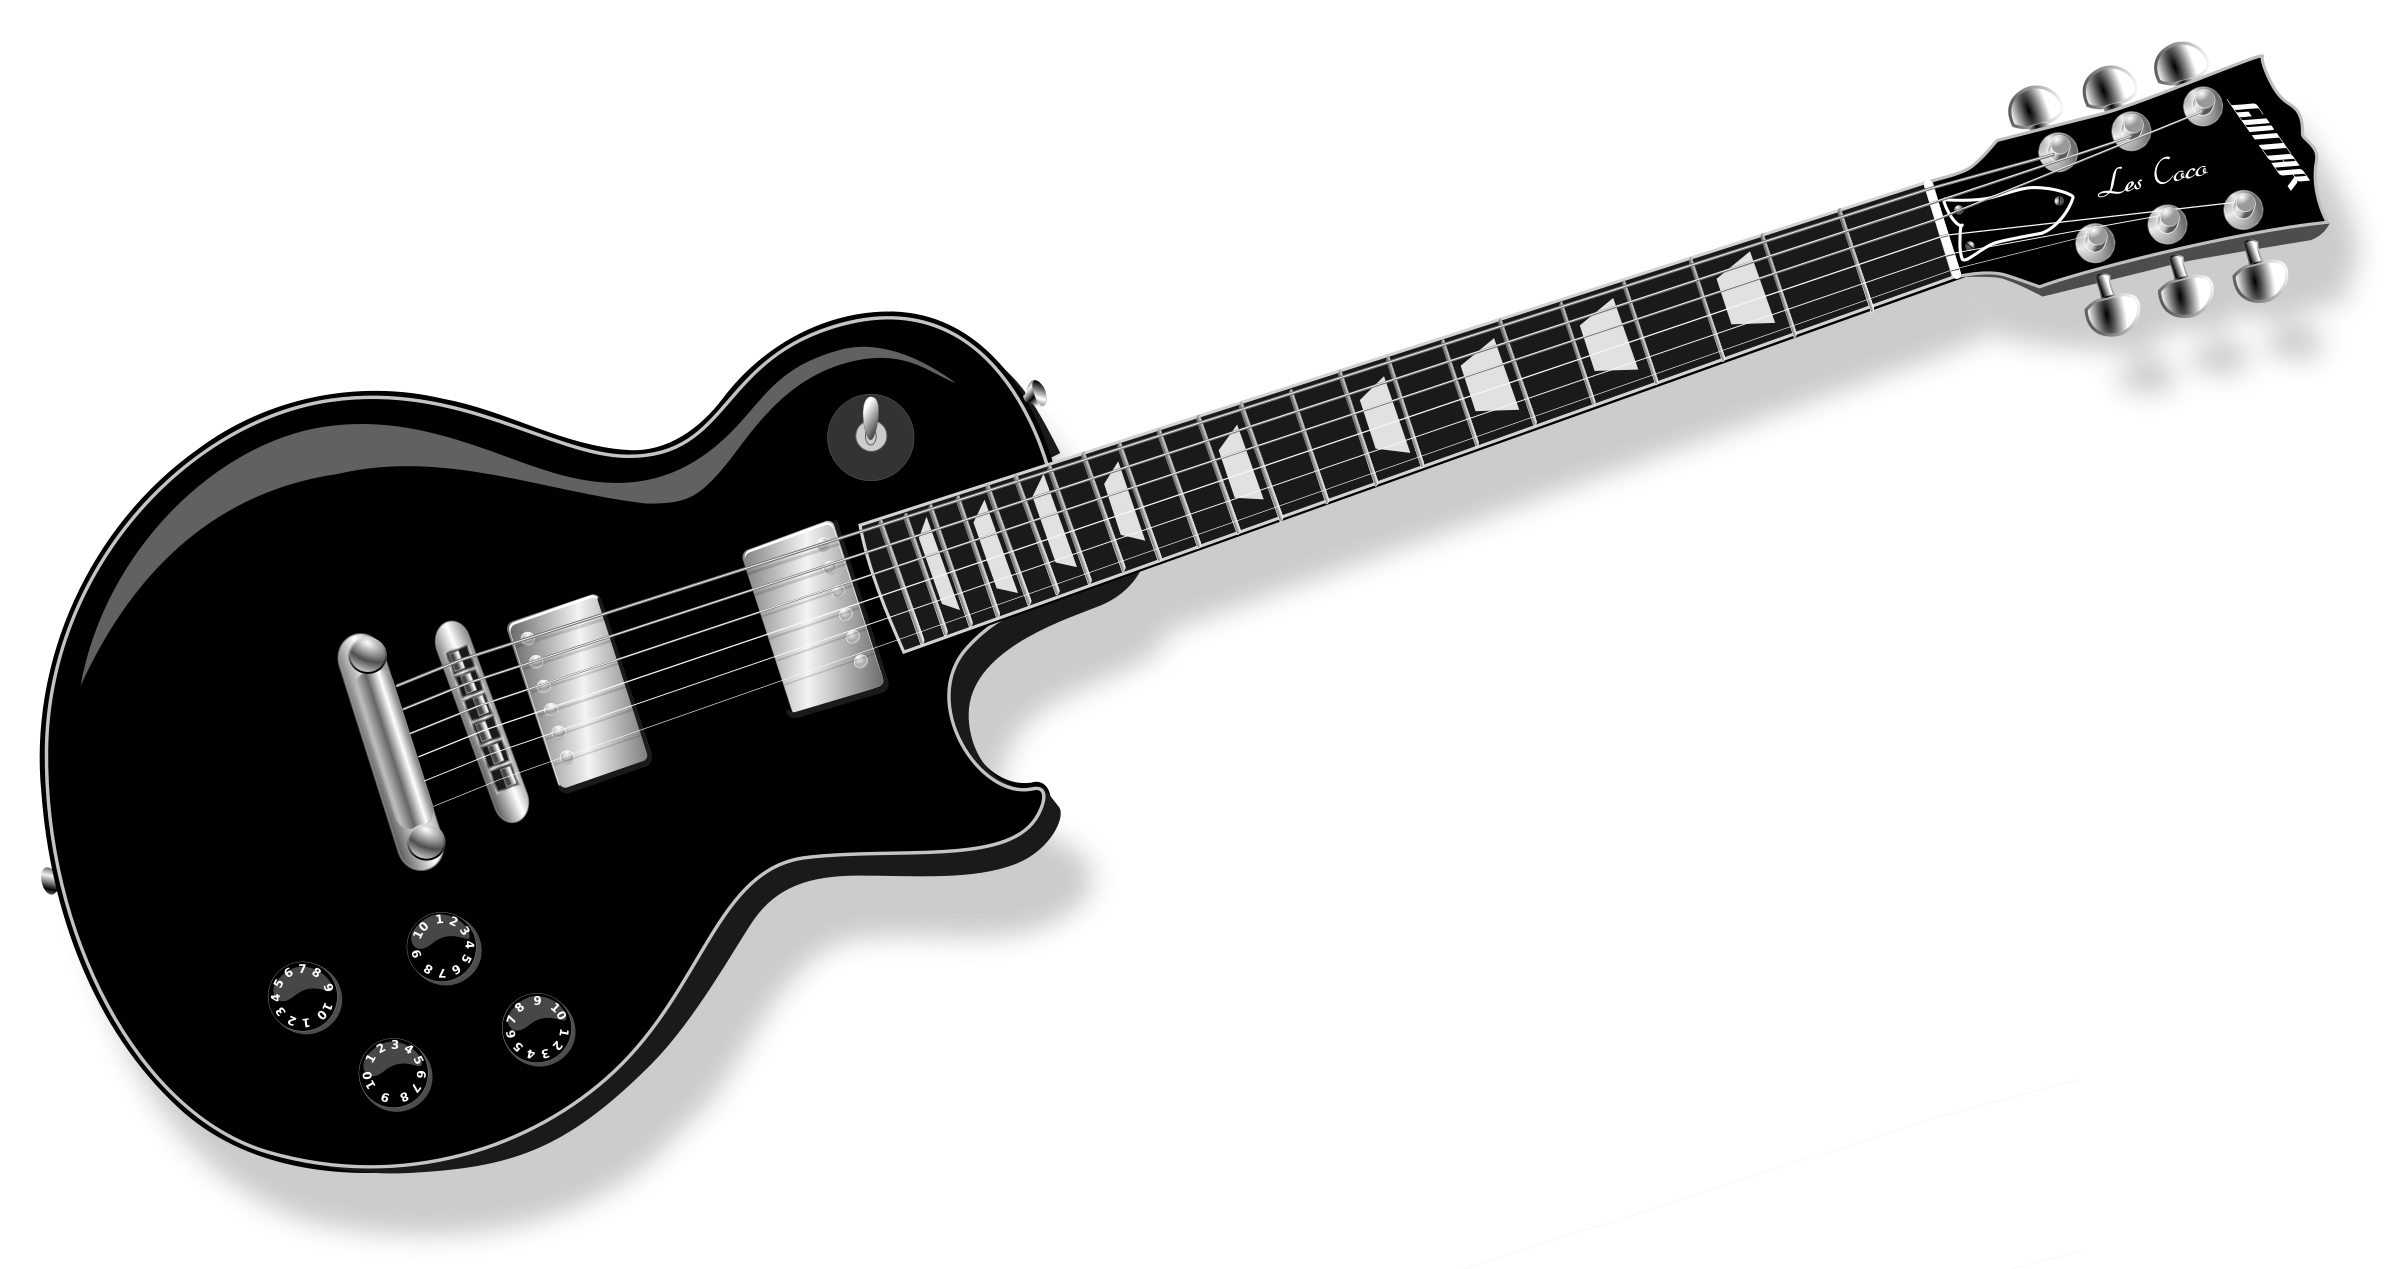 Guitar Clip Art Image | Clipart library - Free Clipart Images